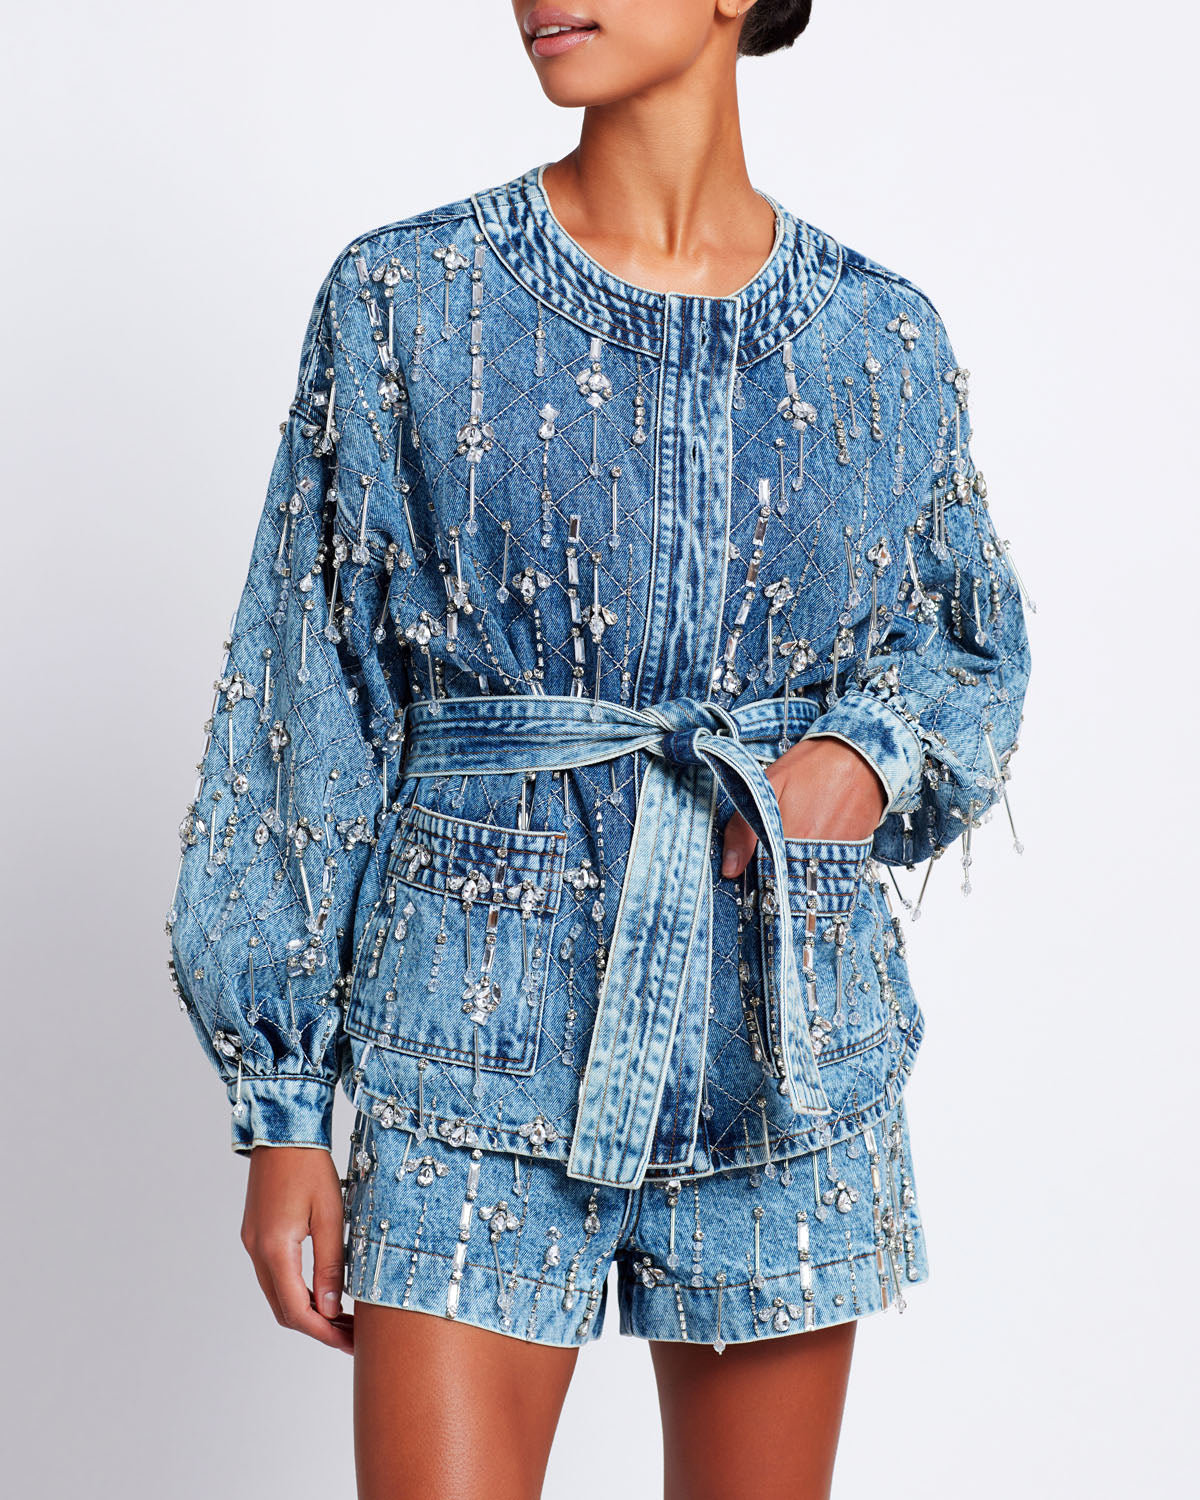 Stylish Diamond Beaded Crown Denim Suit With Tassel Detailing For Women  Long Puff Sleeve Fall Jackets Women And Jeans Set Outfit GBYXTY ZL1070 From  Balee, $49.23